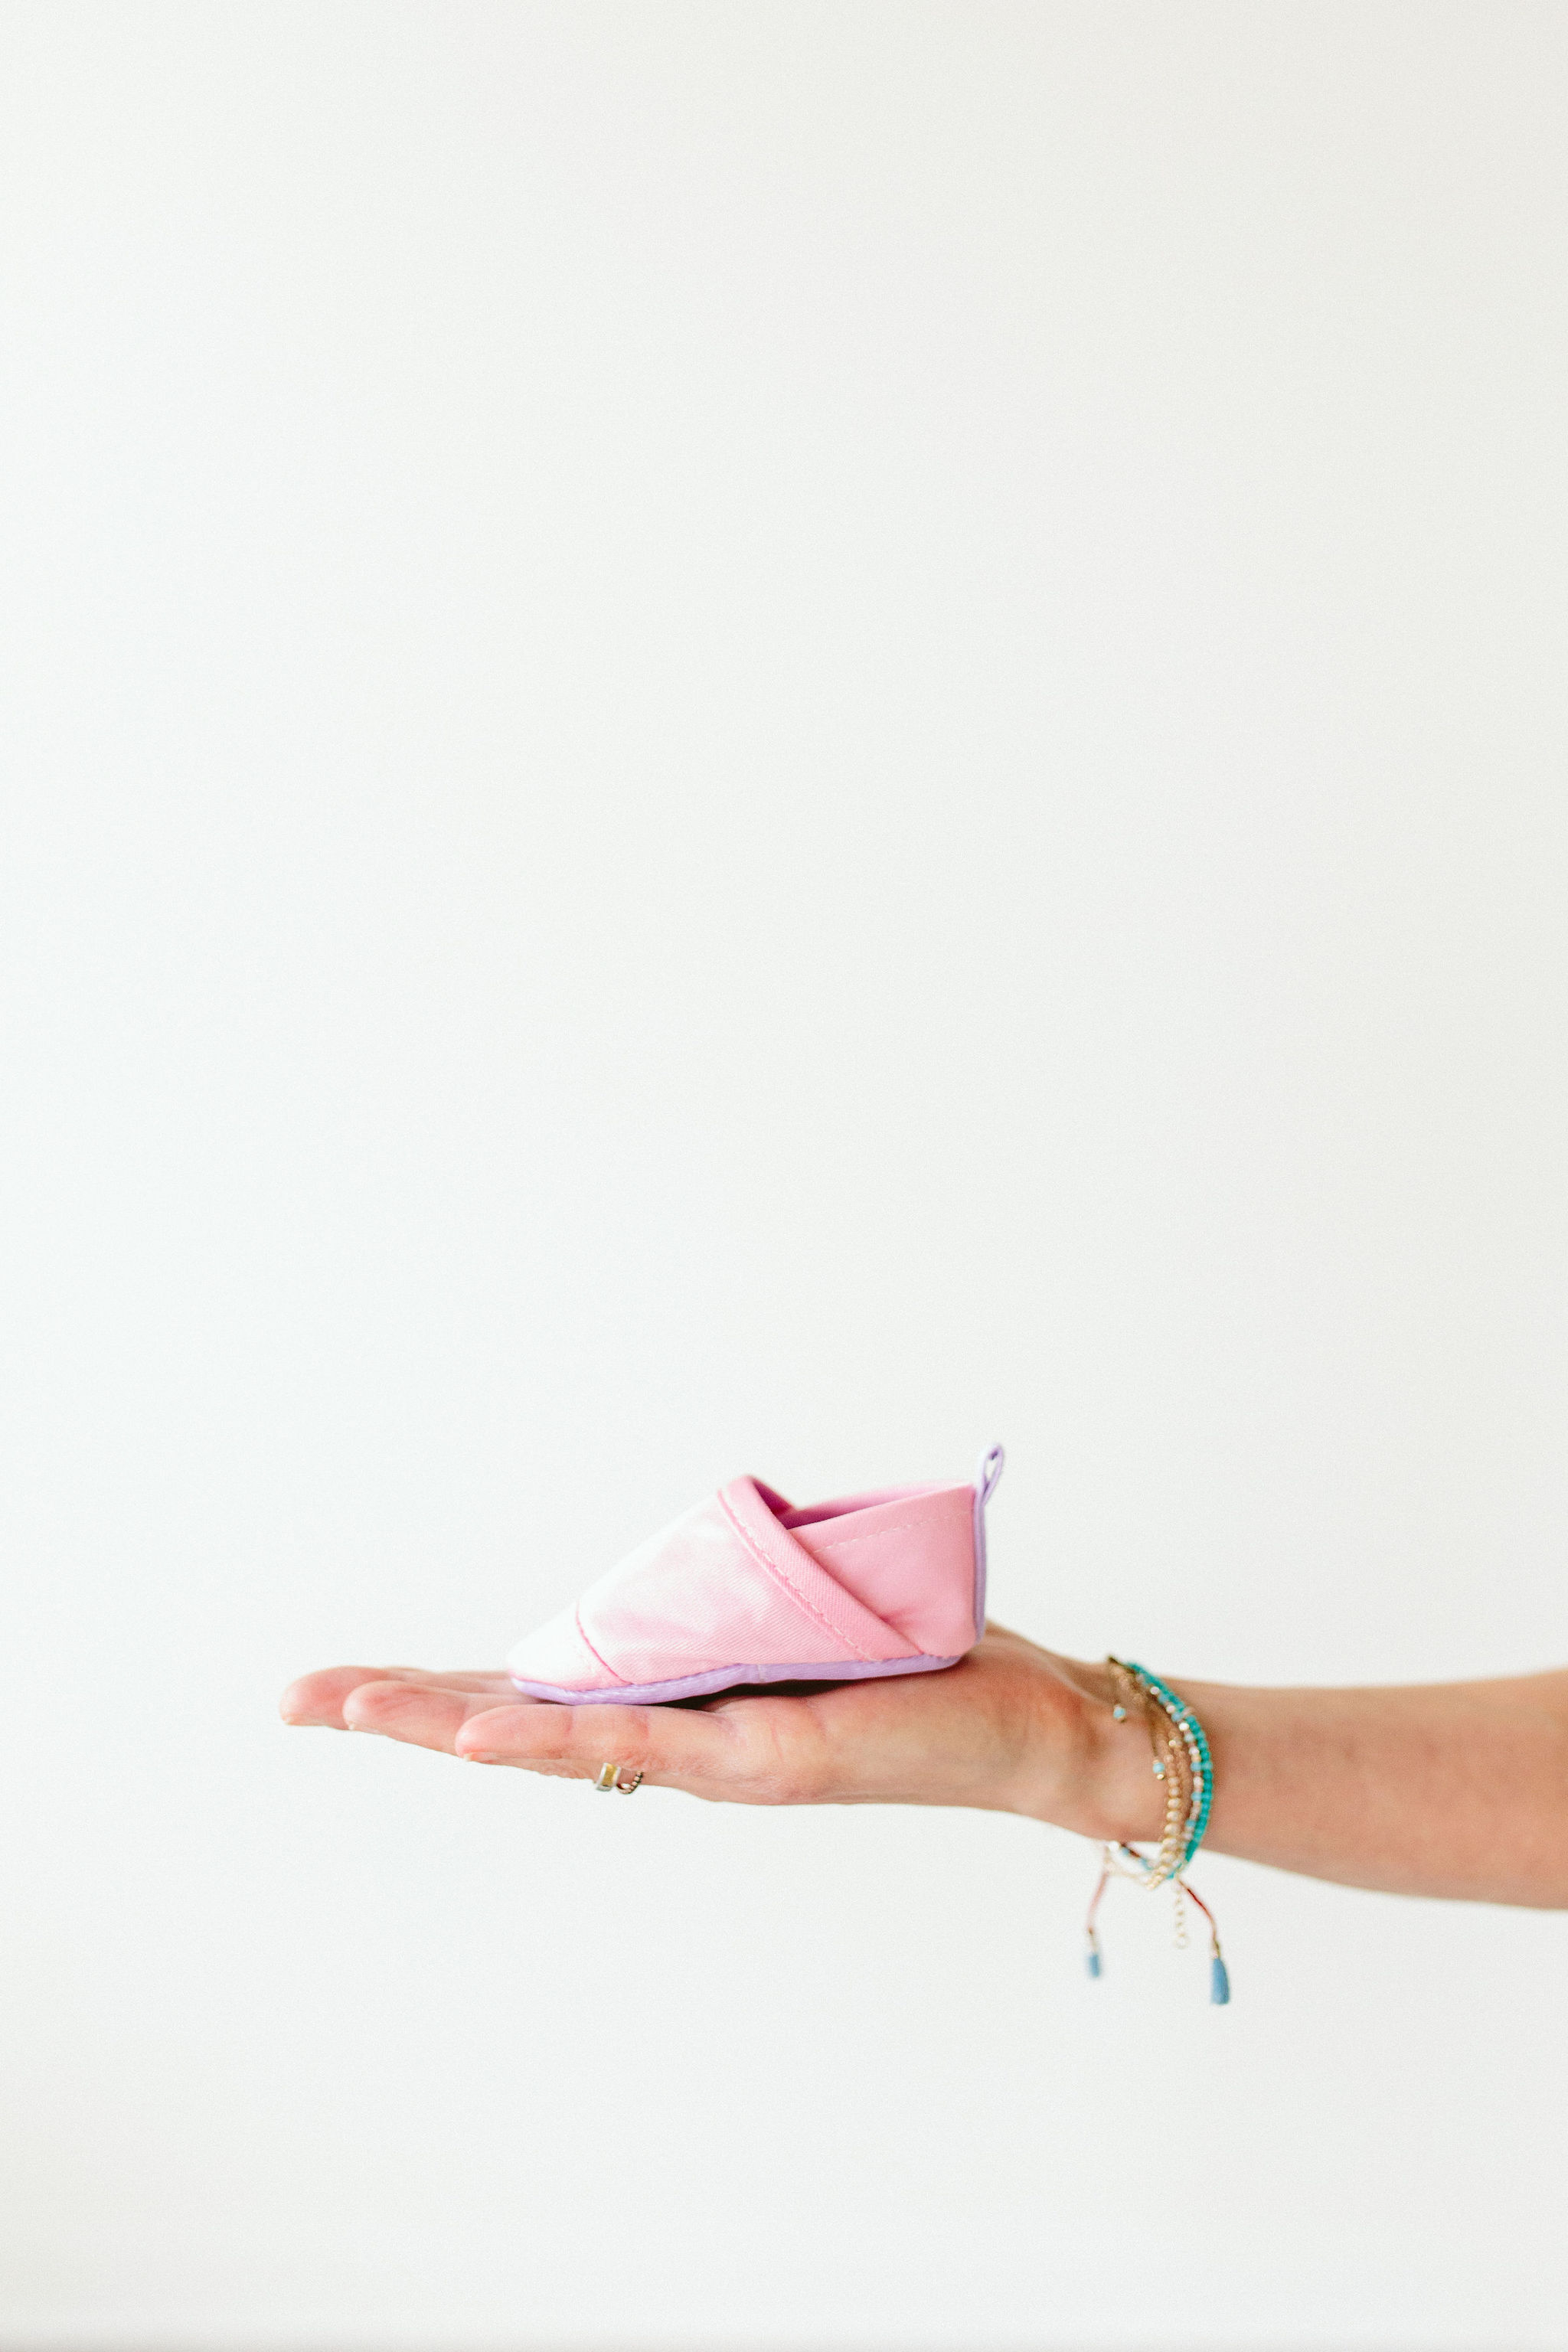 woolybubs-presents-a-pair-of-biodegradable-baby-shoes-that-dissolve-in-boiling-water